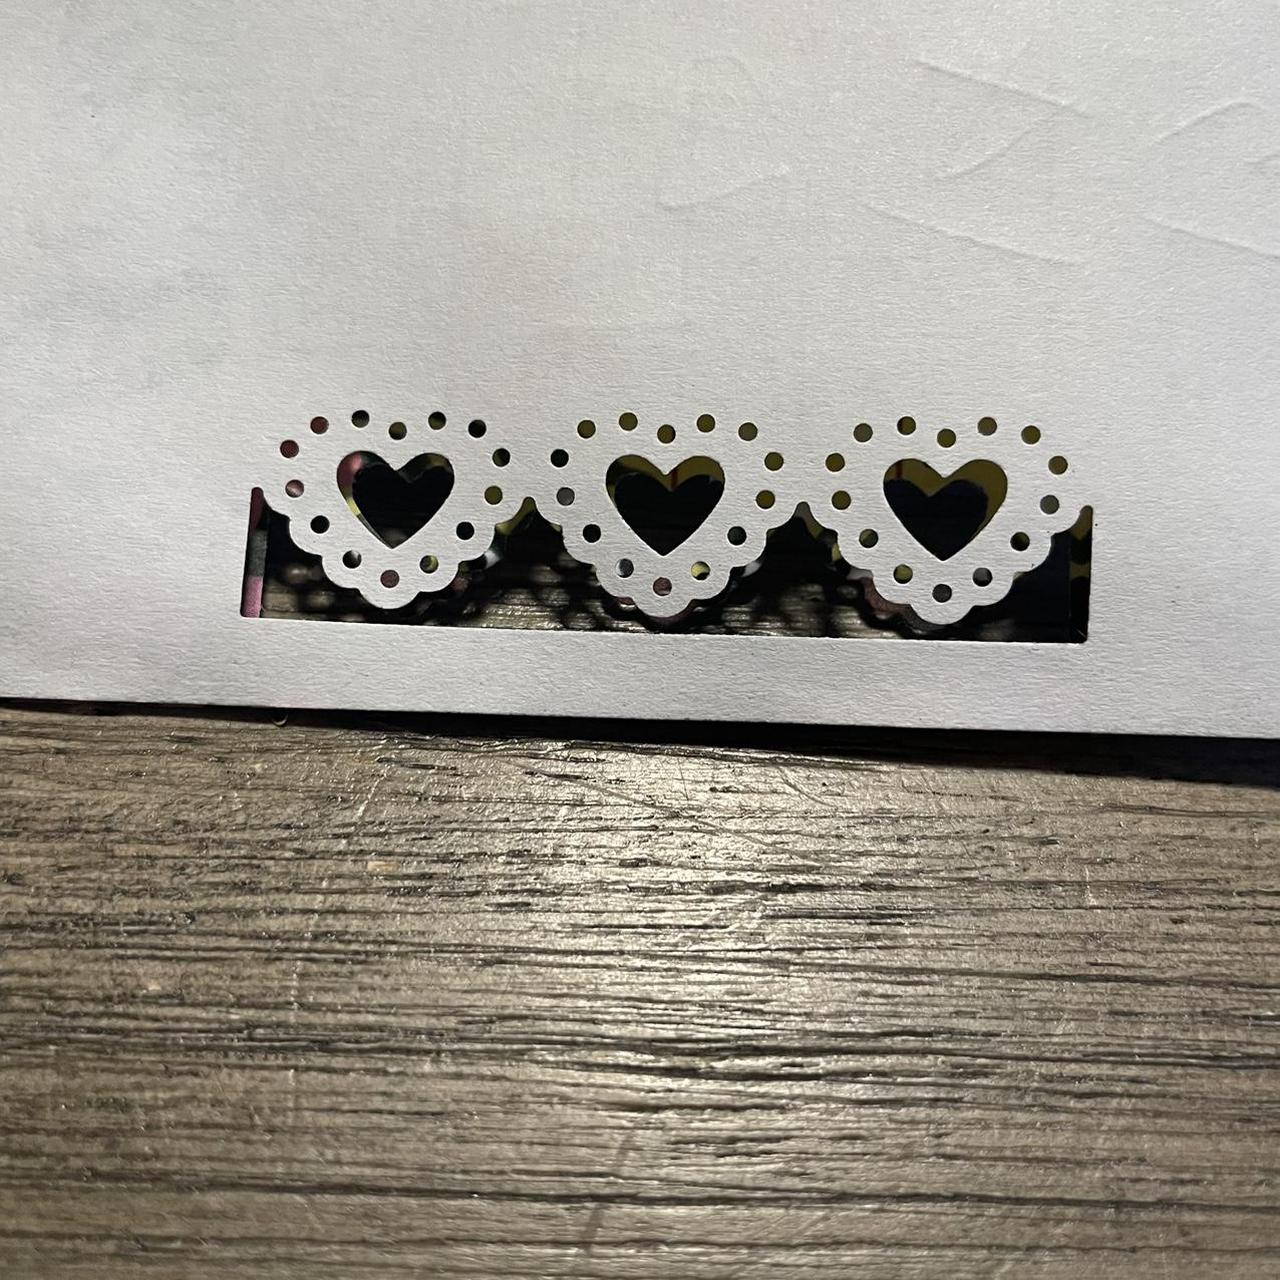 Product Image 2 - Lace Heart Border Punch
Punch is